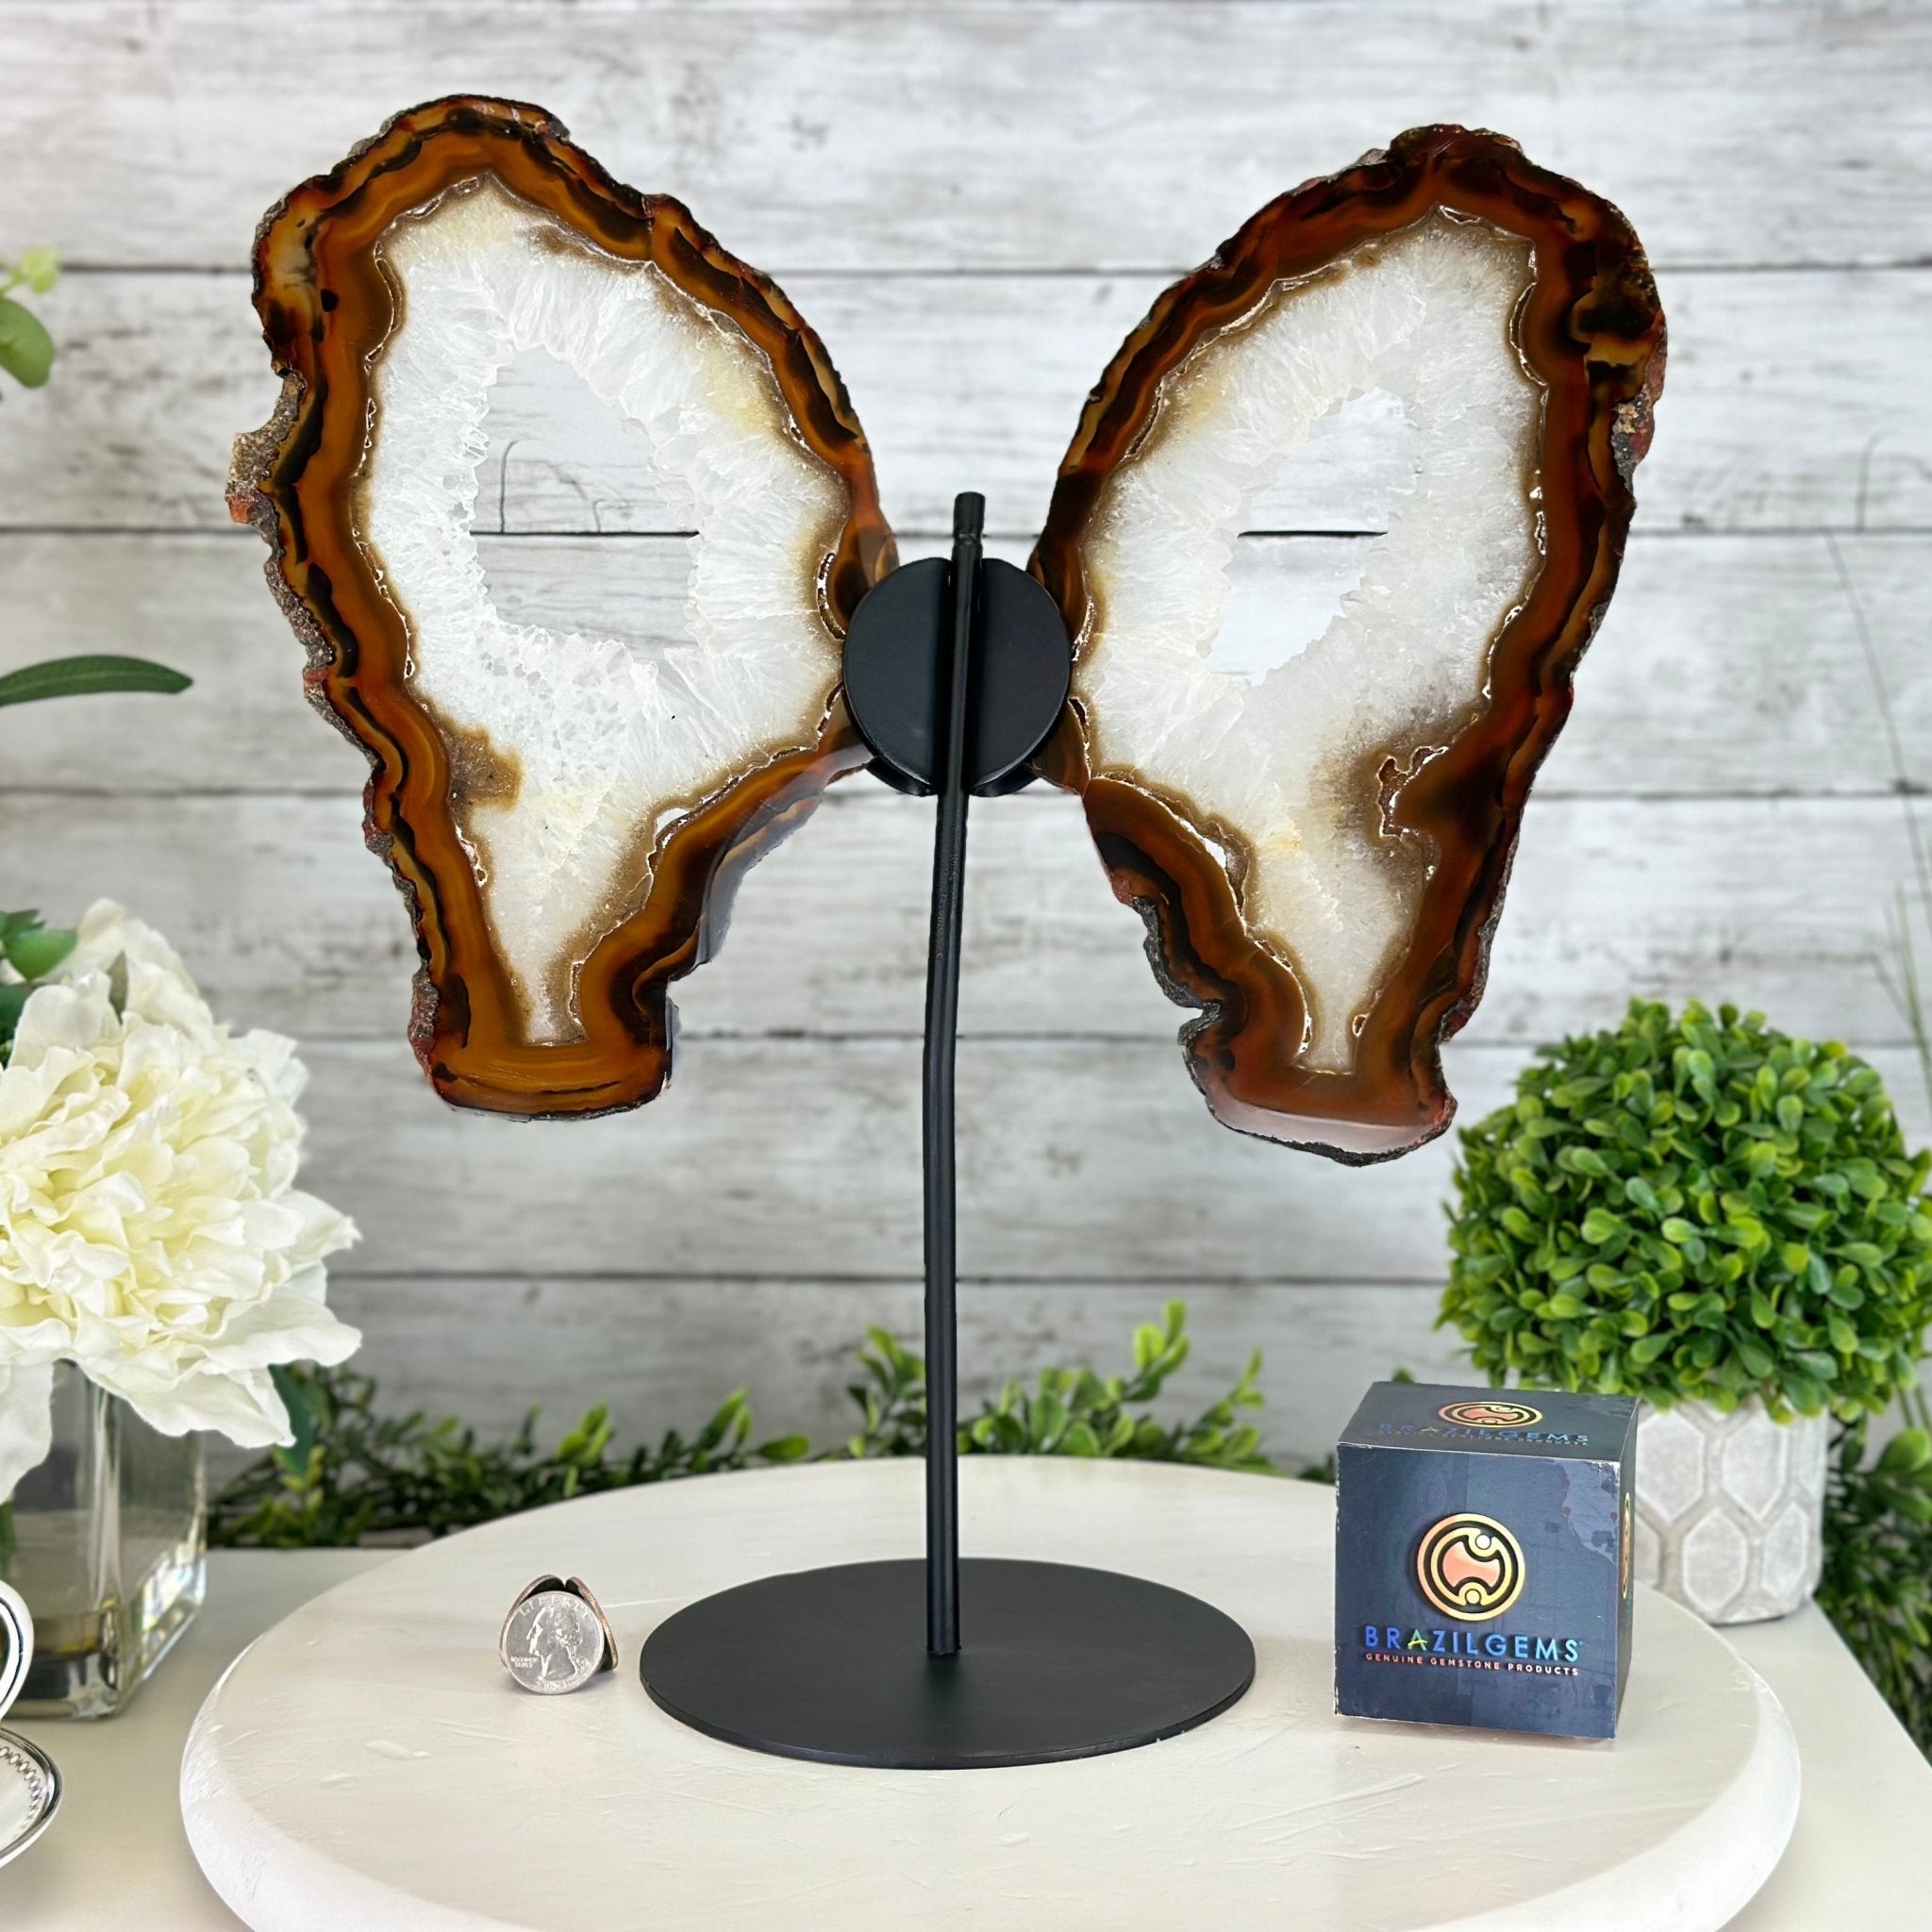 Natural Brazilian Agate "Butterfly Wings", 15" Tall #5050NA-081 - Brazil GemsBrazil GemsNatural Brazilian Agate "Butterfly Wings", 15" Tall #5050NA-081Agate Butterfly Wings5050NA-081